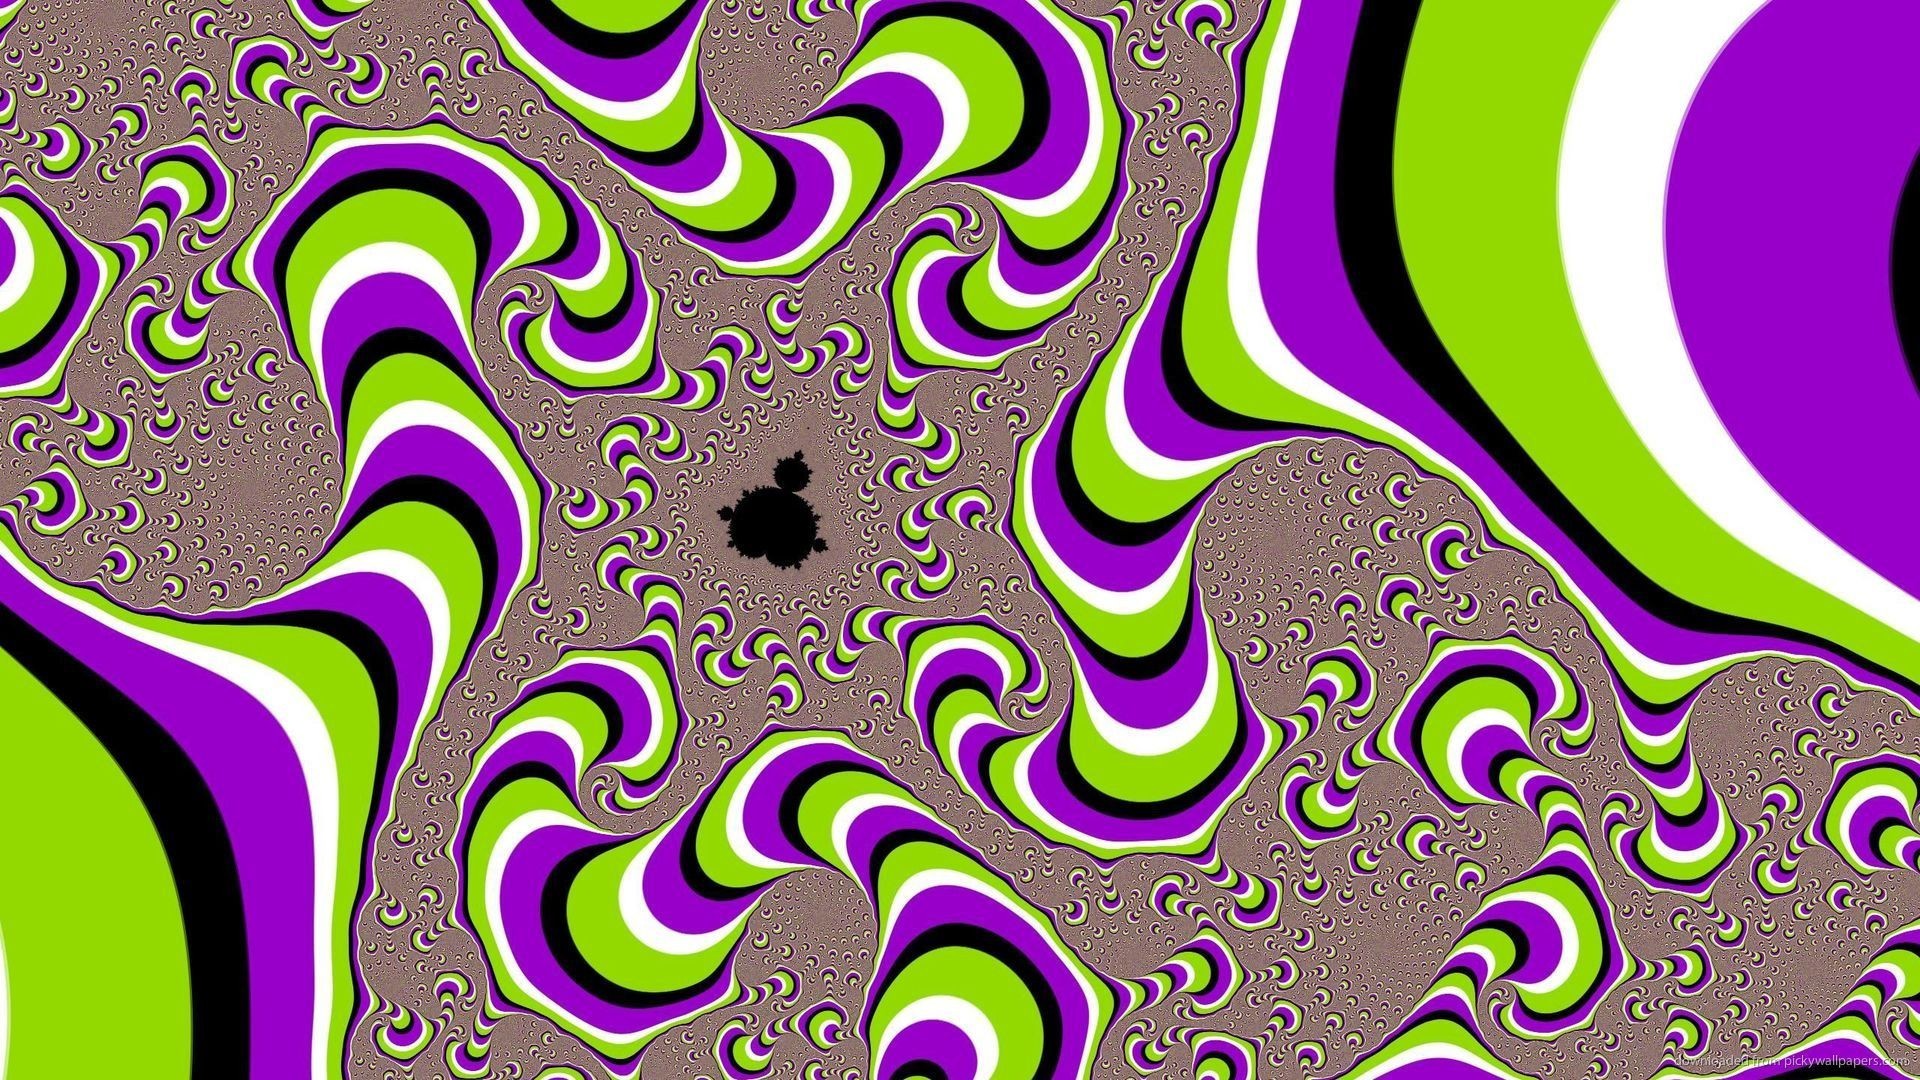 1920x1080 Trippy Twitter Backgrounds Hd New Abstract Illusion